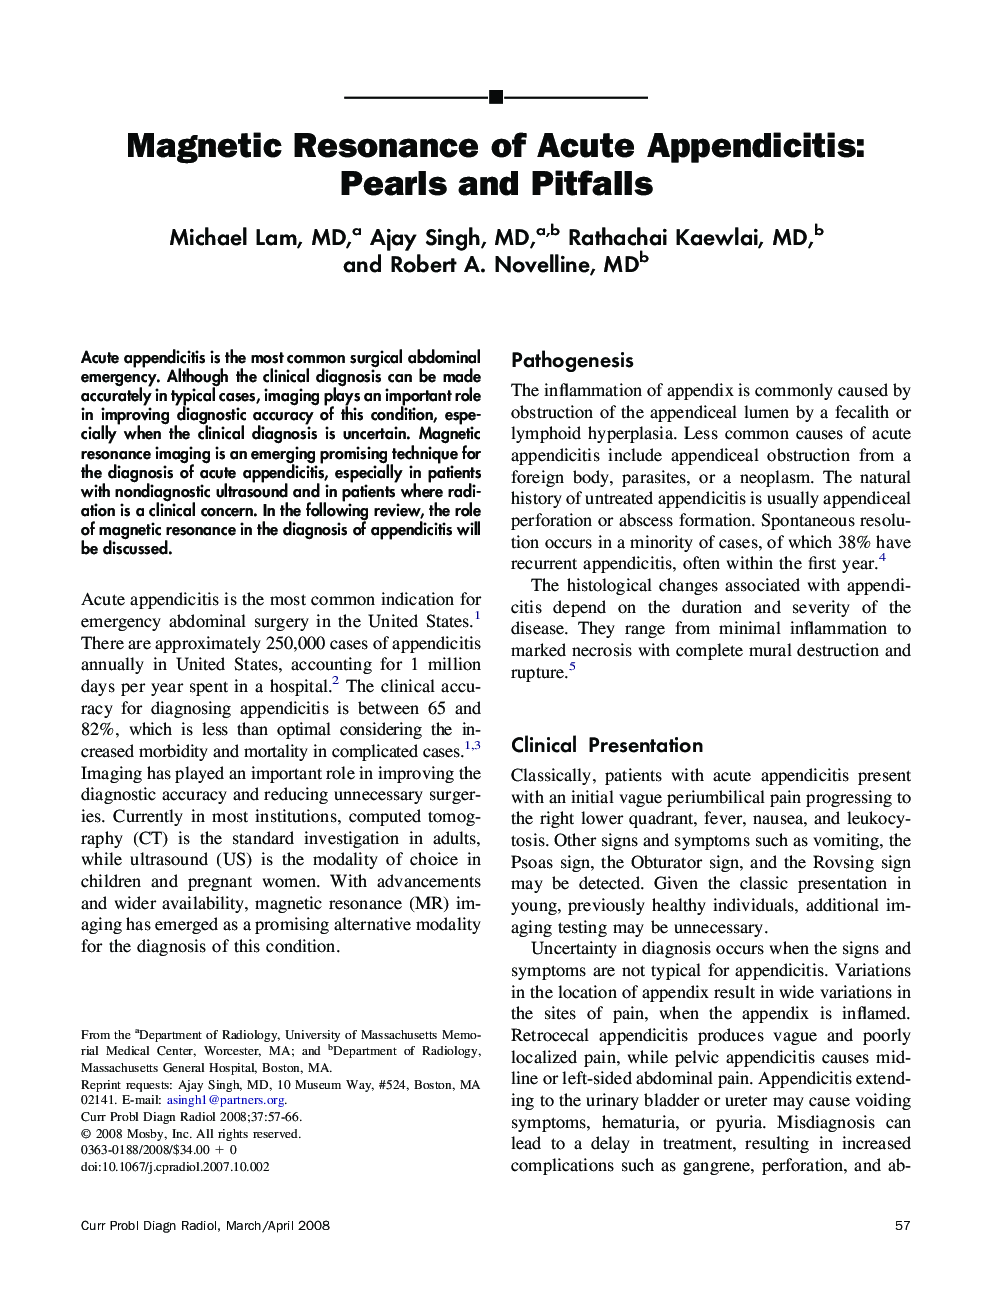 Magnetic Resonance of Acute Appendicitis: Pearls and Pitfalls